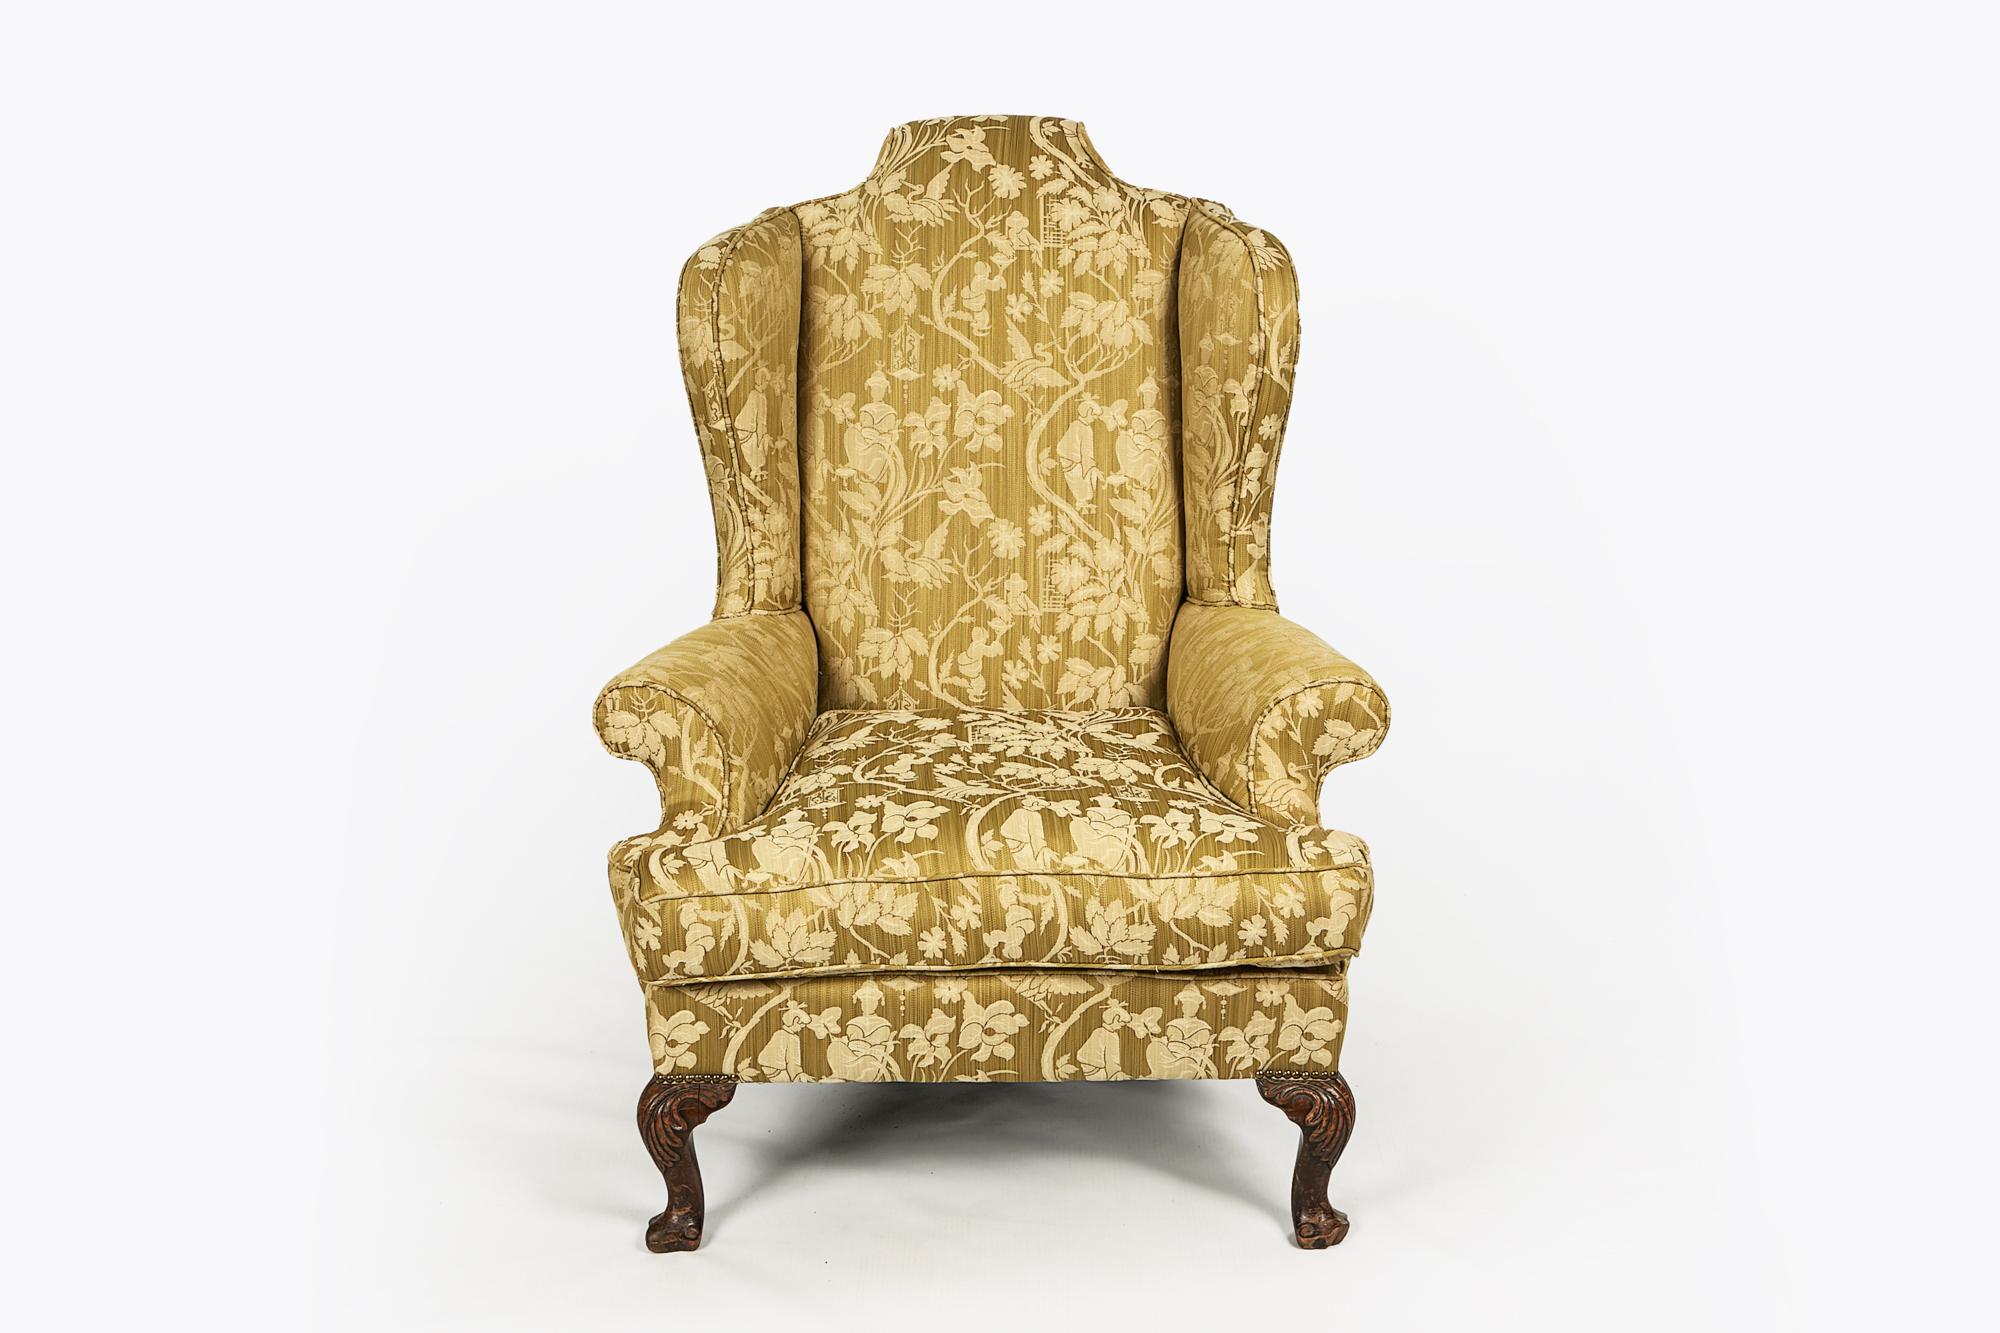 18th century George III Irish mahogany wing chair, the headrest of scroll form. Ornately carved scrolling foliate cabriole legs terminating on trifid foot.